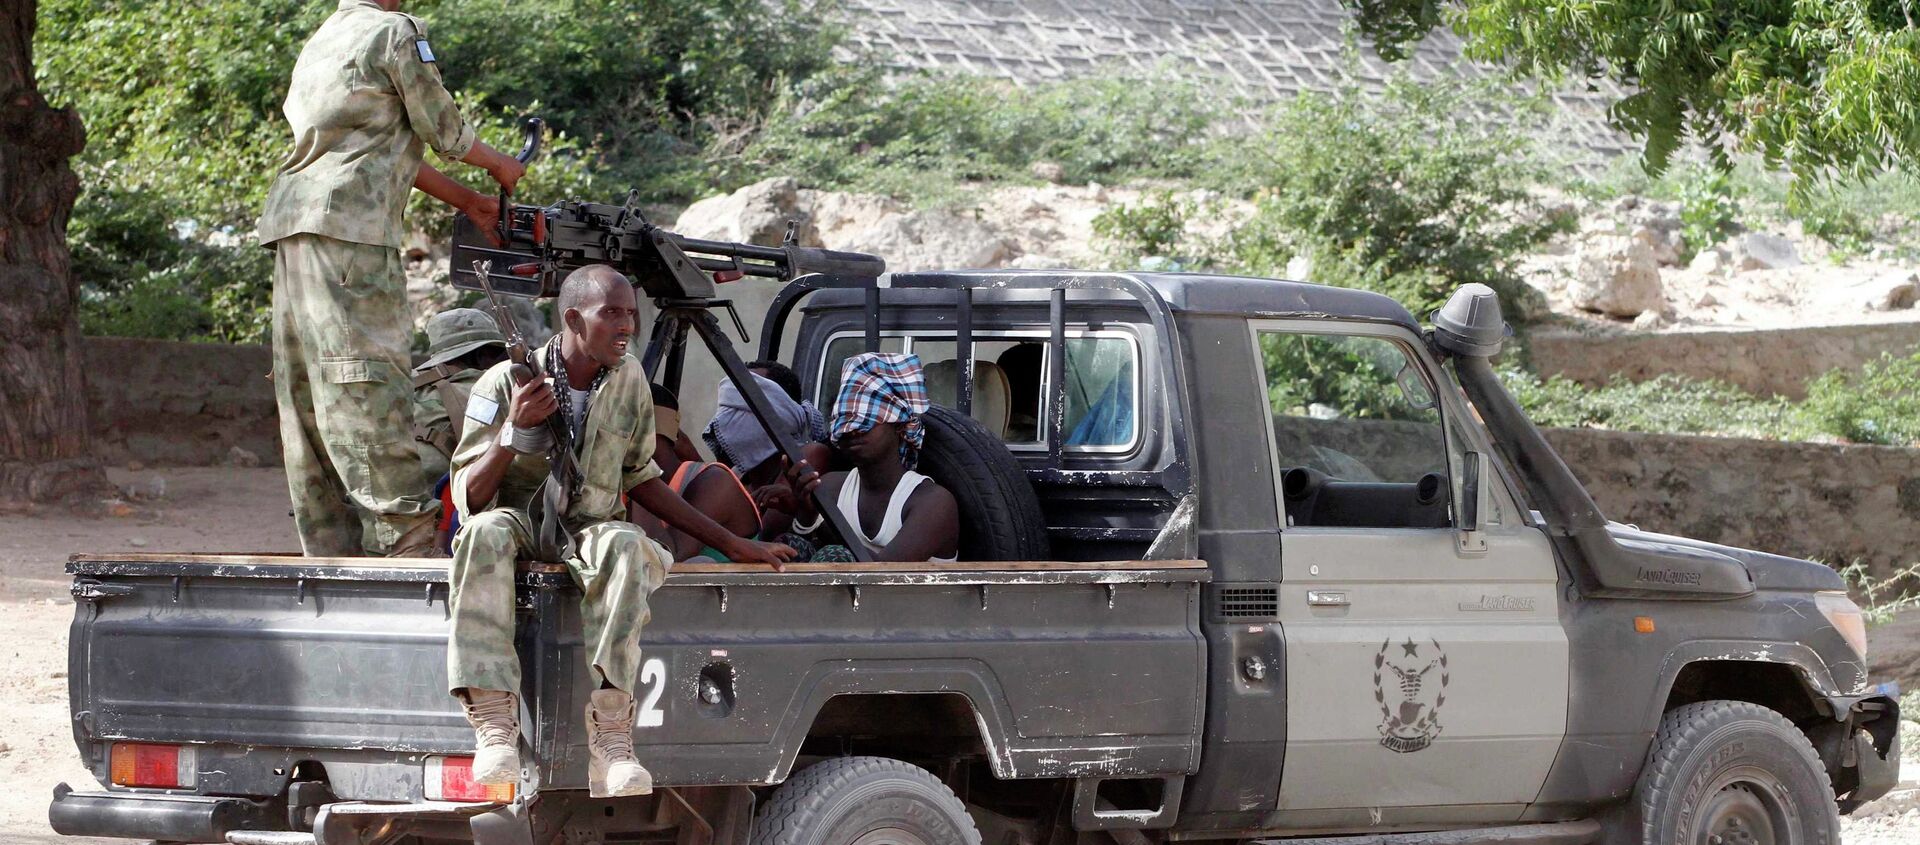 Somalia security forces transport blind-folded suspects detained on their pick-up truck after attackers from the militant group al Shabaab invaded the African Union's Halane base on the edge of the Mogadishu international airport compound in Somalia's capital Mogadishu - Sputnik International, 1920, 31.01.2020